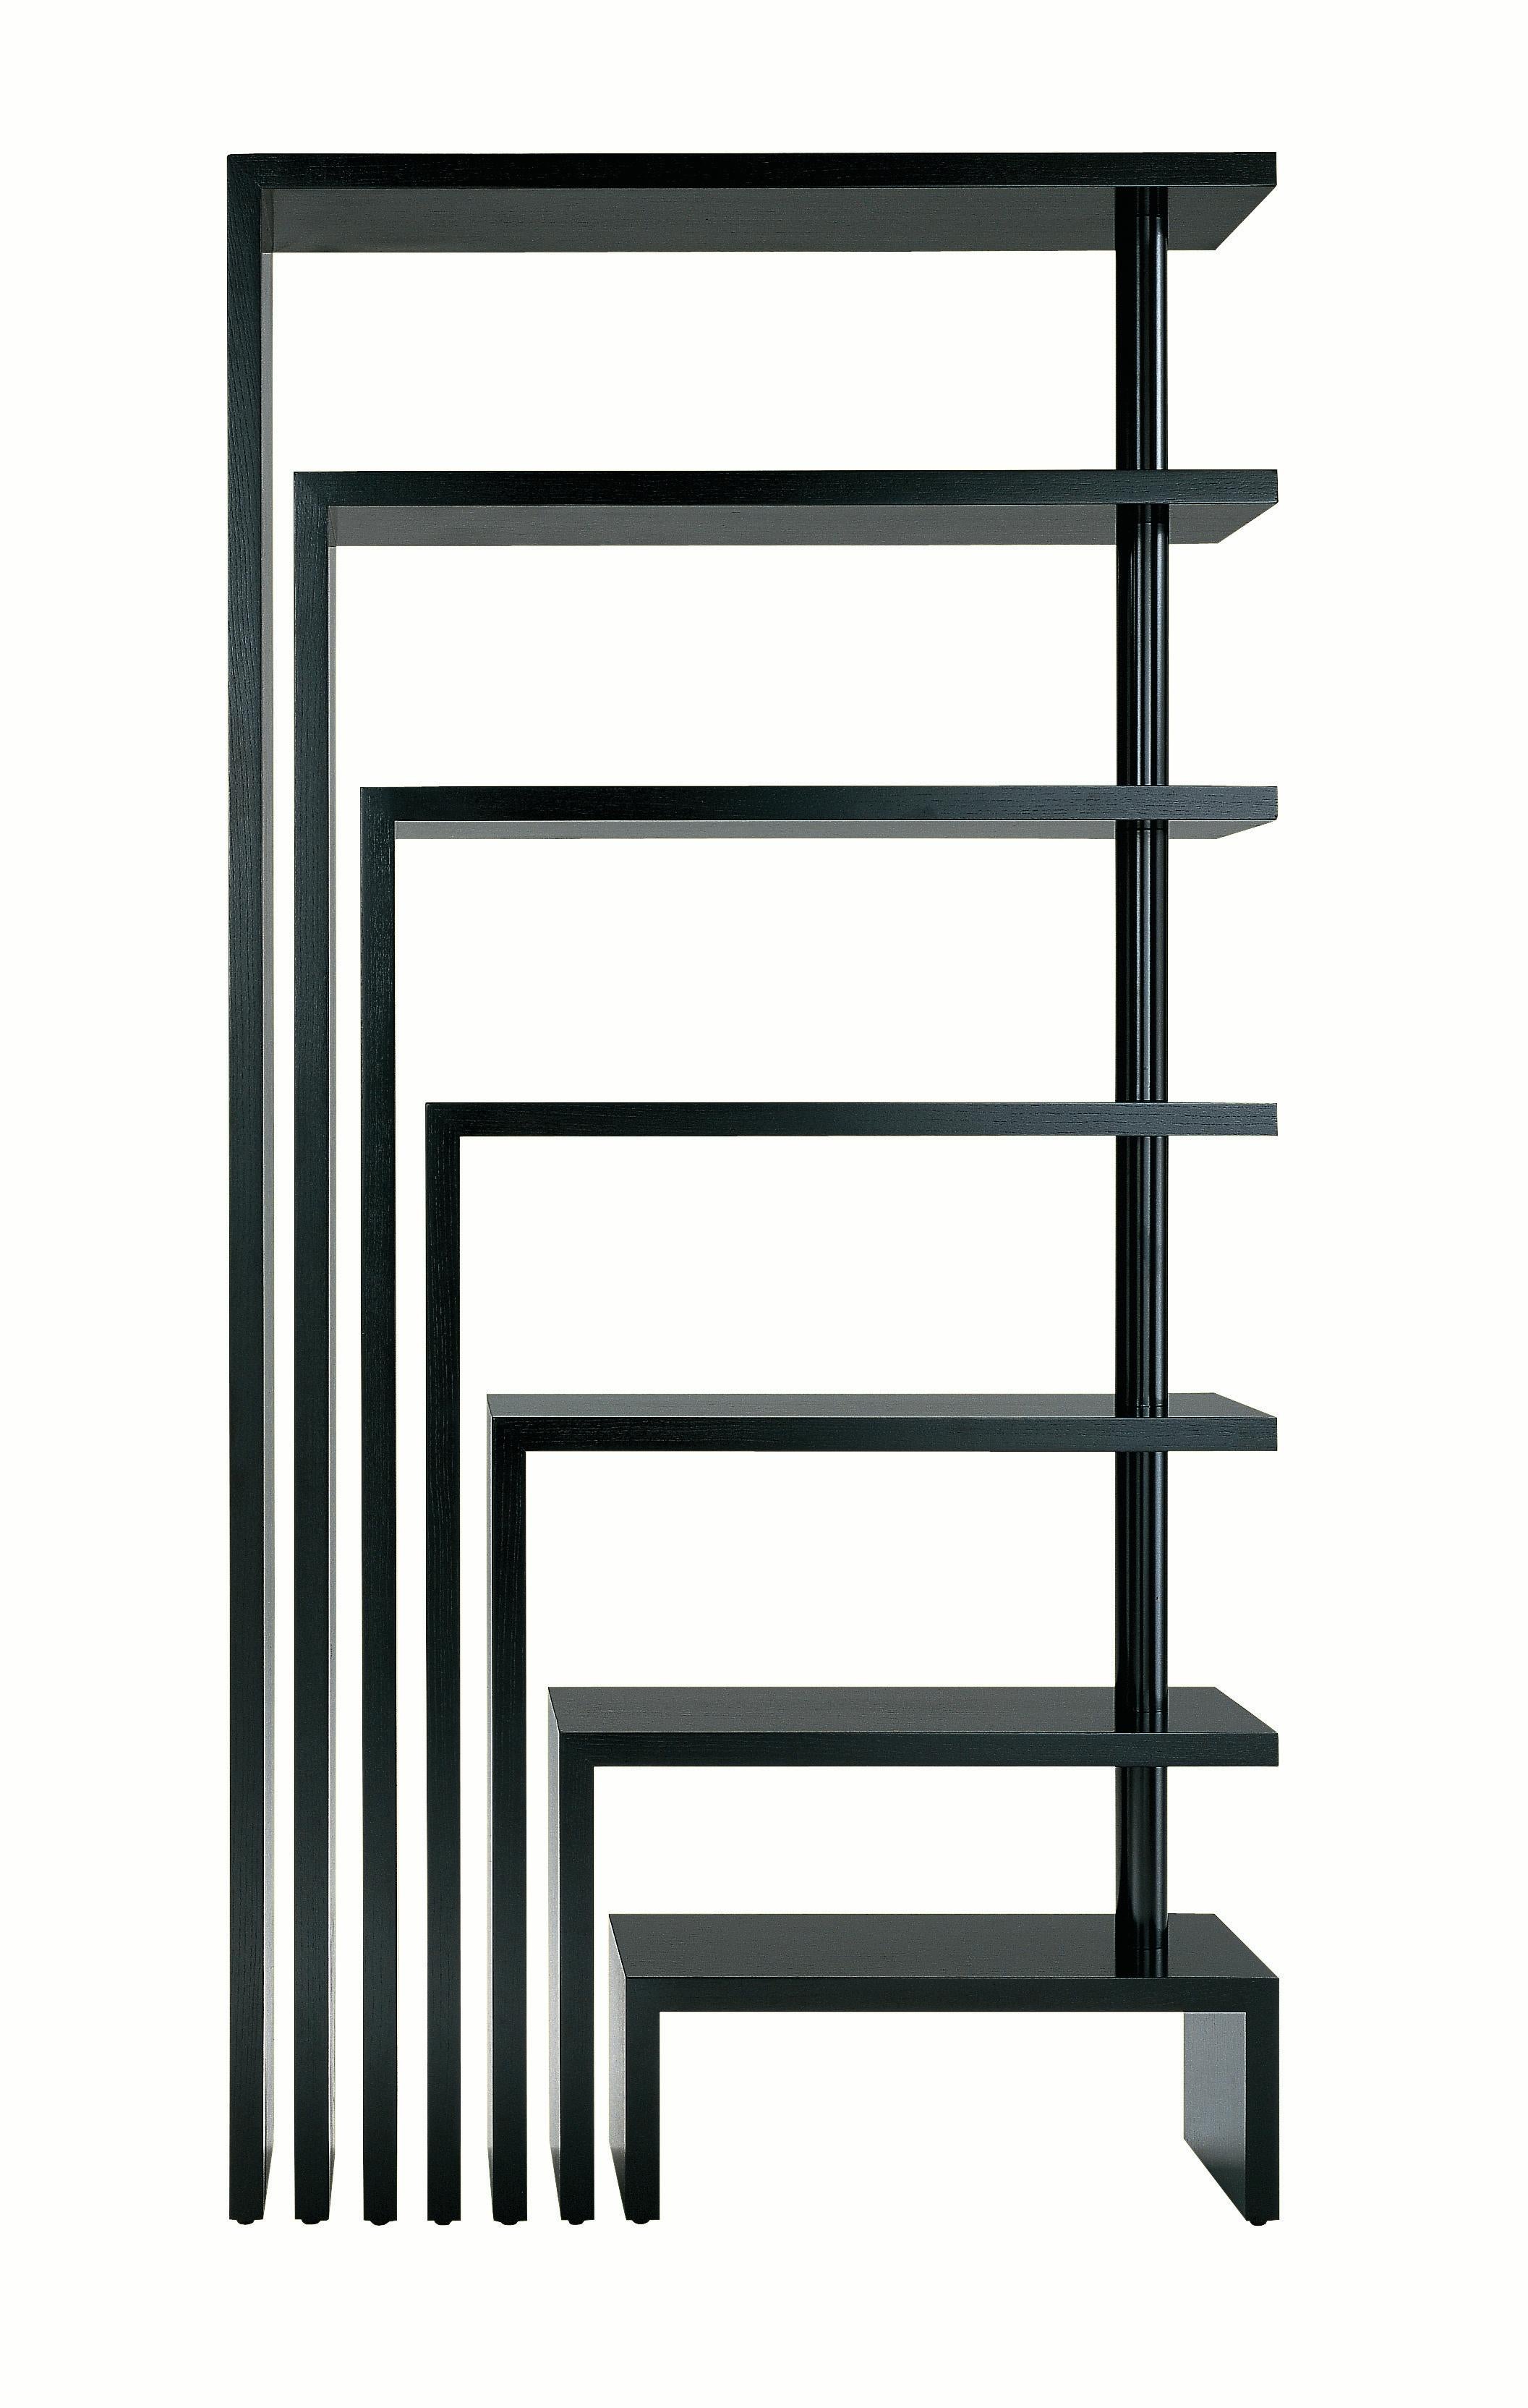 Zanotta Joy Rotating 7 Shelf Unit in Black Medium Density Fiberboard by Achille Castiglioni

Uprights and shelves in medium density fiberboard, finished with scratch-resistant embossing in white, black or burgundy. Steel articulated joints painted